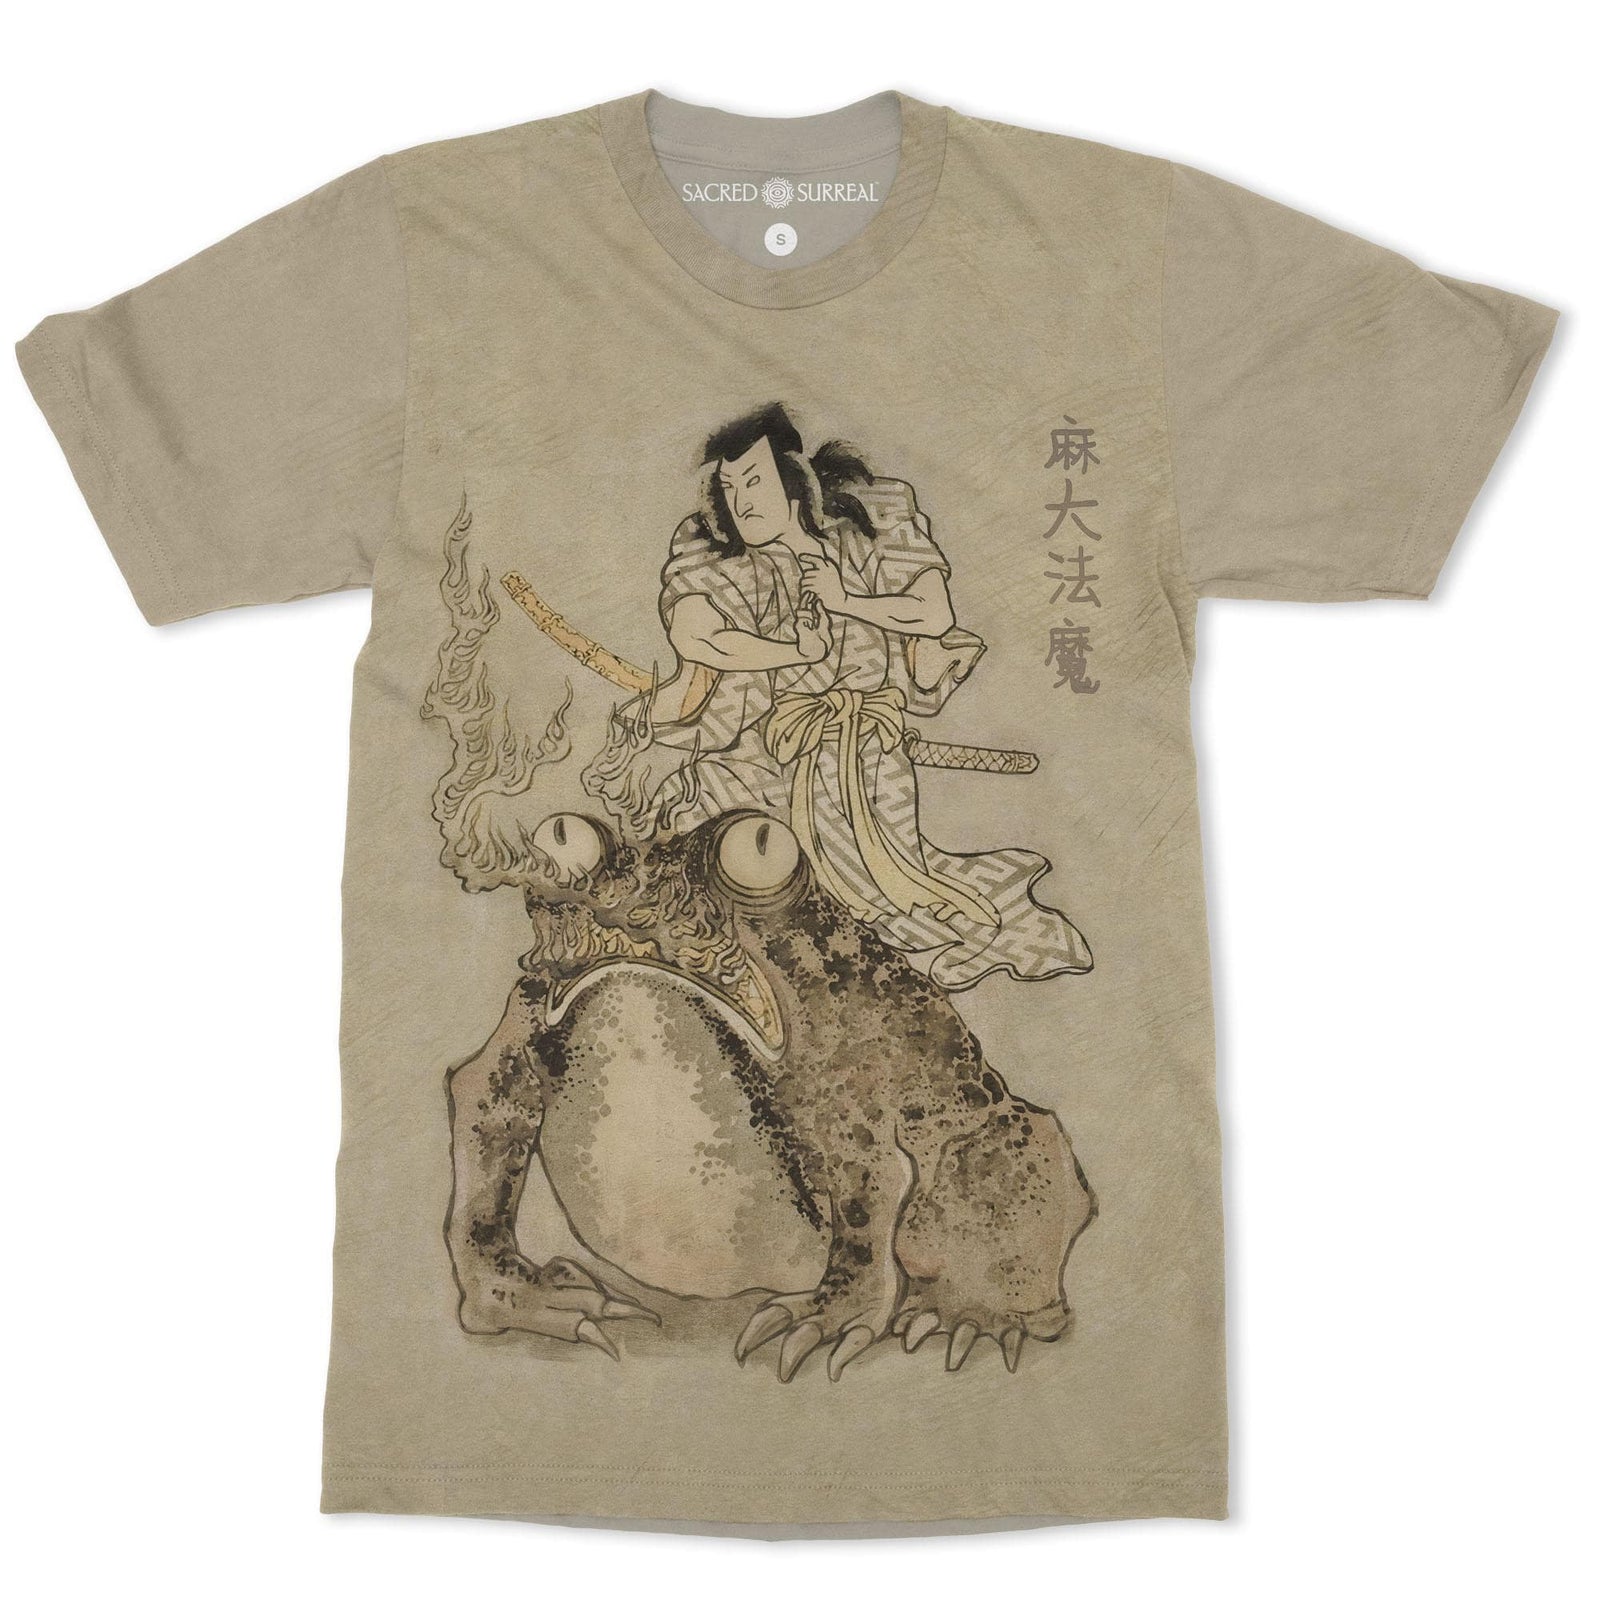 AOP T-Shirt XS Magician with a Giant Toad Ukiyo-e Japanese Samurai Ronin Woodblock Sorcerer Occult Vintage Japanese Graphic Art T-Shirt Tee